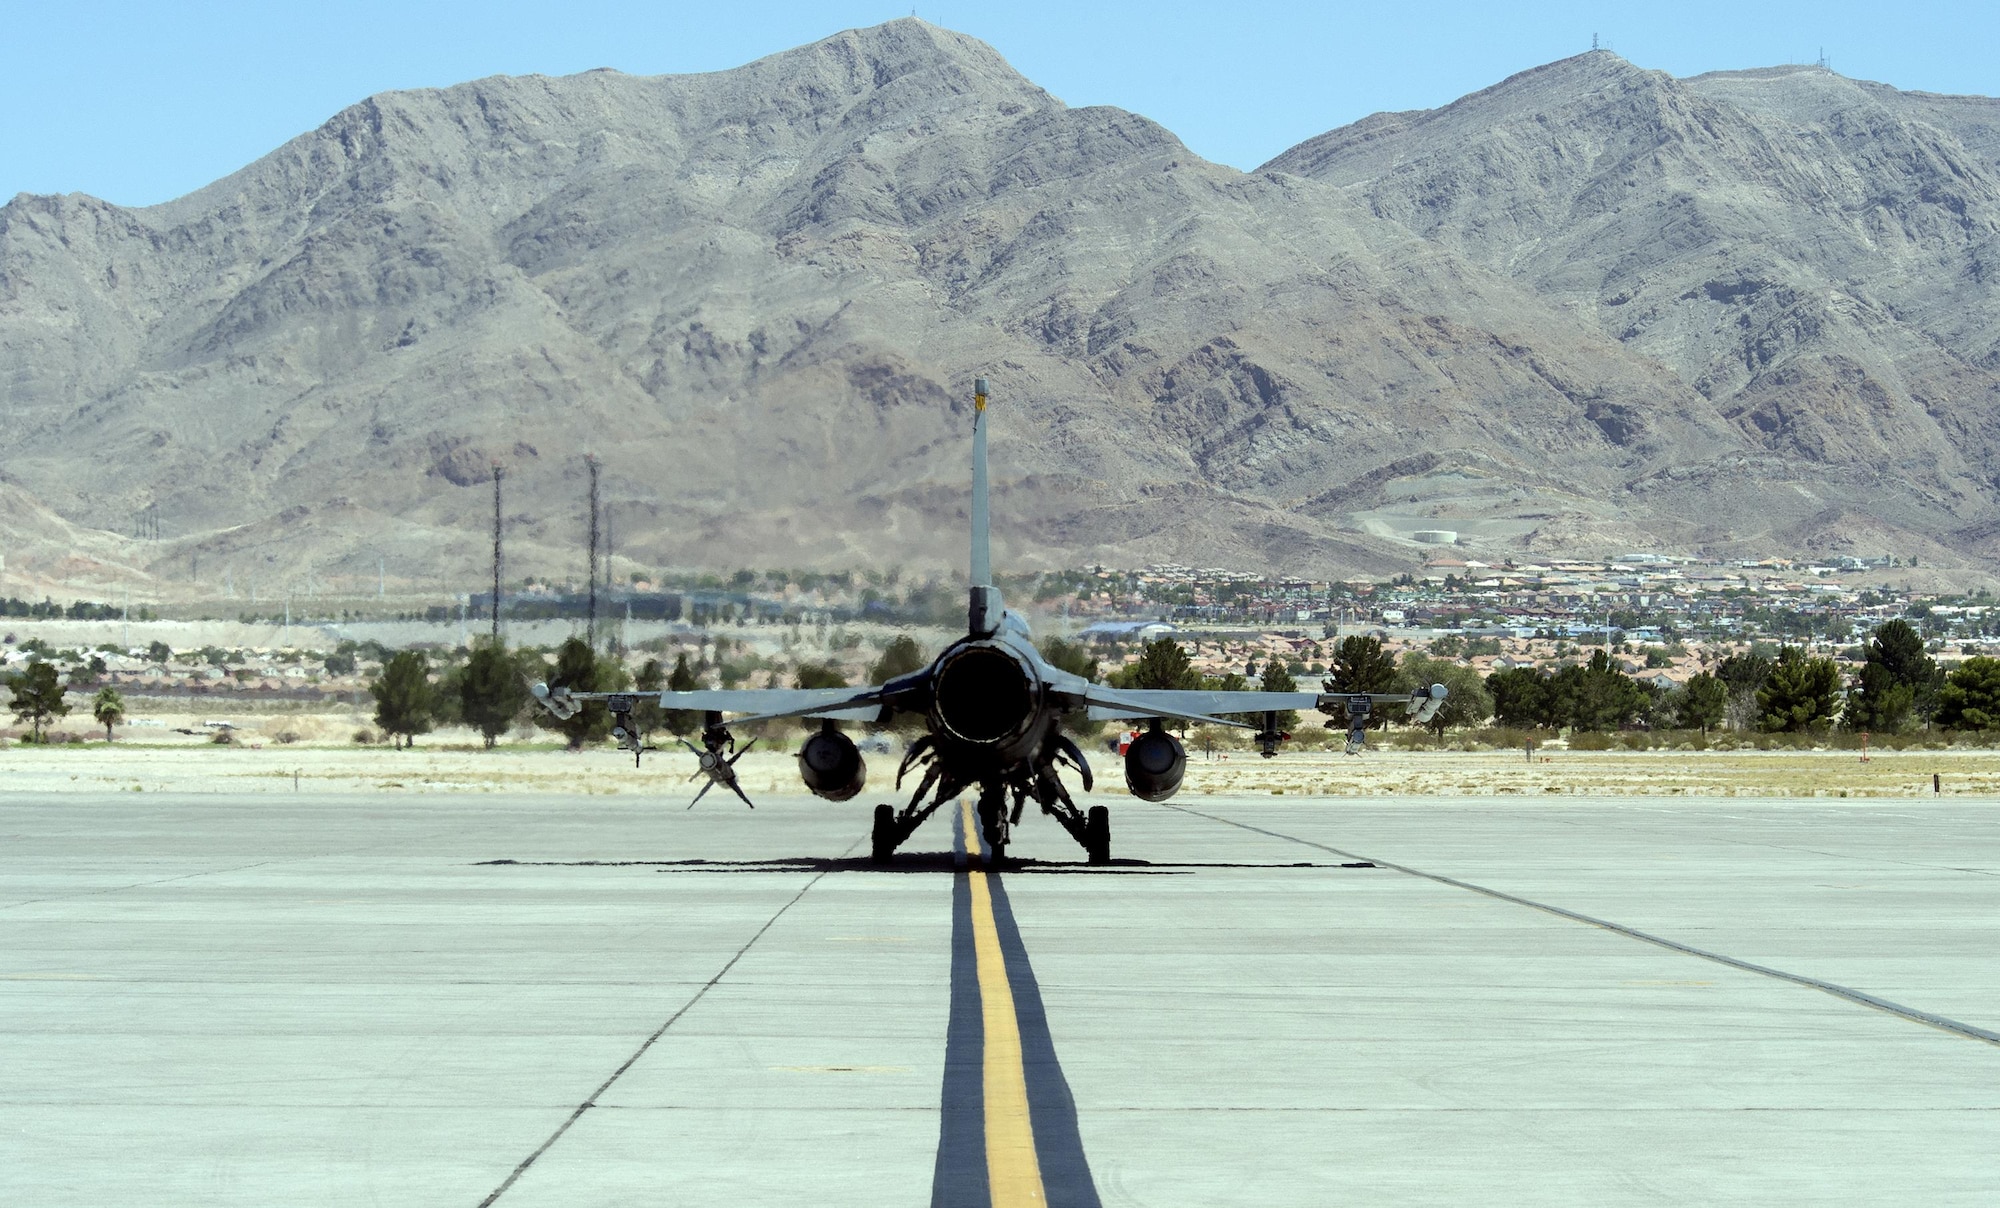 A 79th Fighter Squadron F-16 Fighting Falcon from Shaw Air Force Base, South Carolina, taxis on the flightline during Red Flag 16-3 at Nellis Air Force Base, Nevada, Monday, July 11, 2016. Red Flag is the service’s premier air-to-air combat training exercise and one of a series of advanced training programs administered by the U.S. Air Force Warfare Center and executed through the 414th Combat Training Squadron. (U.S. Air Force photo/Tech. Sgt. Julius Delos Reyes)